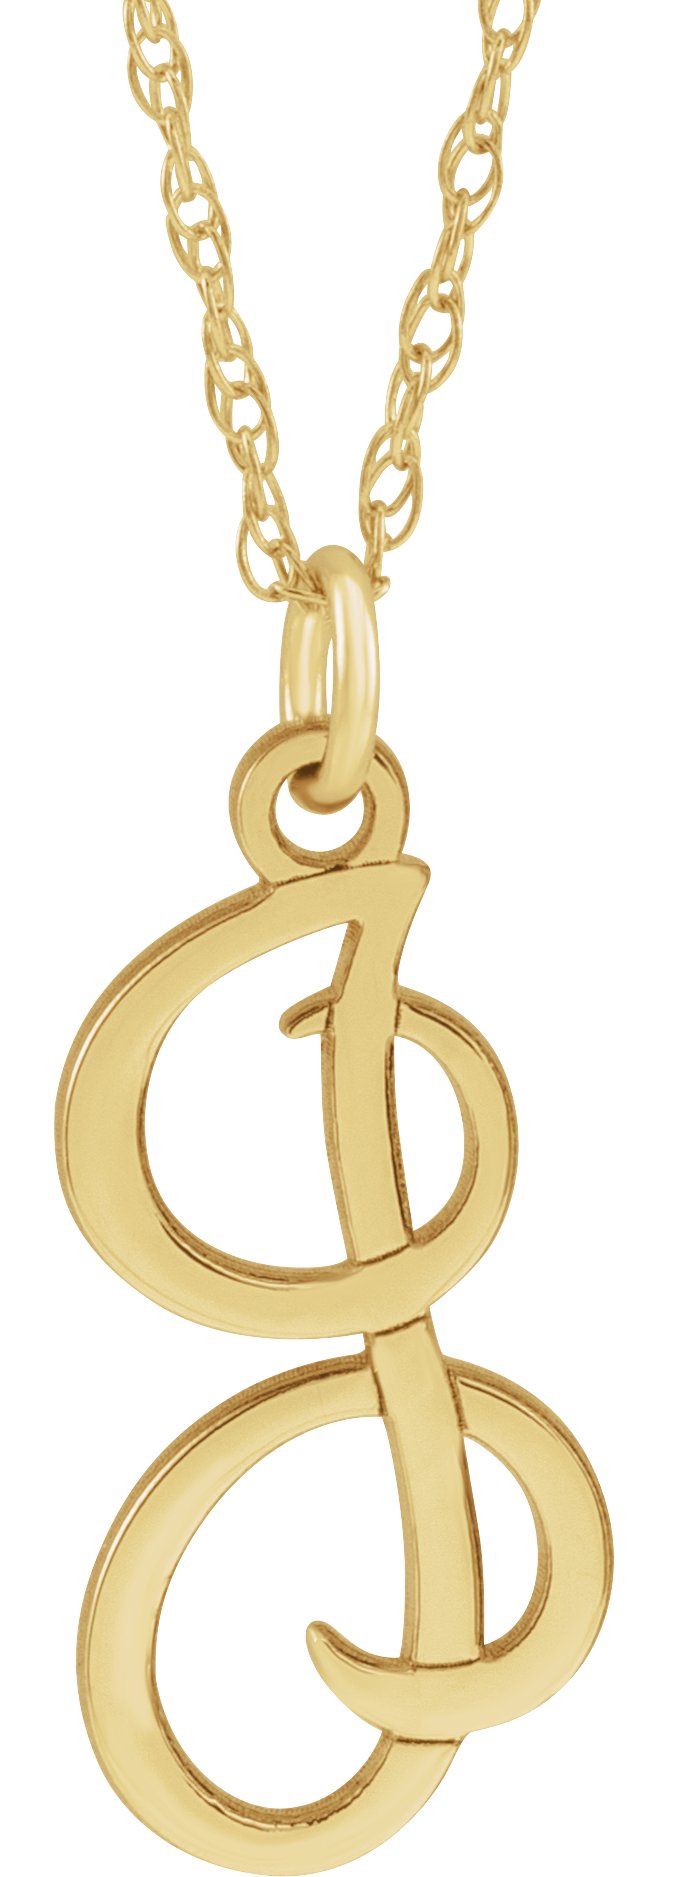 14K Yellow Gold-Plated Sterling Silver Script Initial I 16-18" Necklace